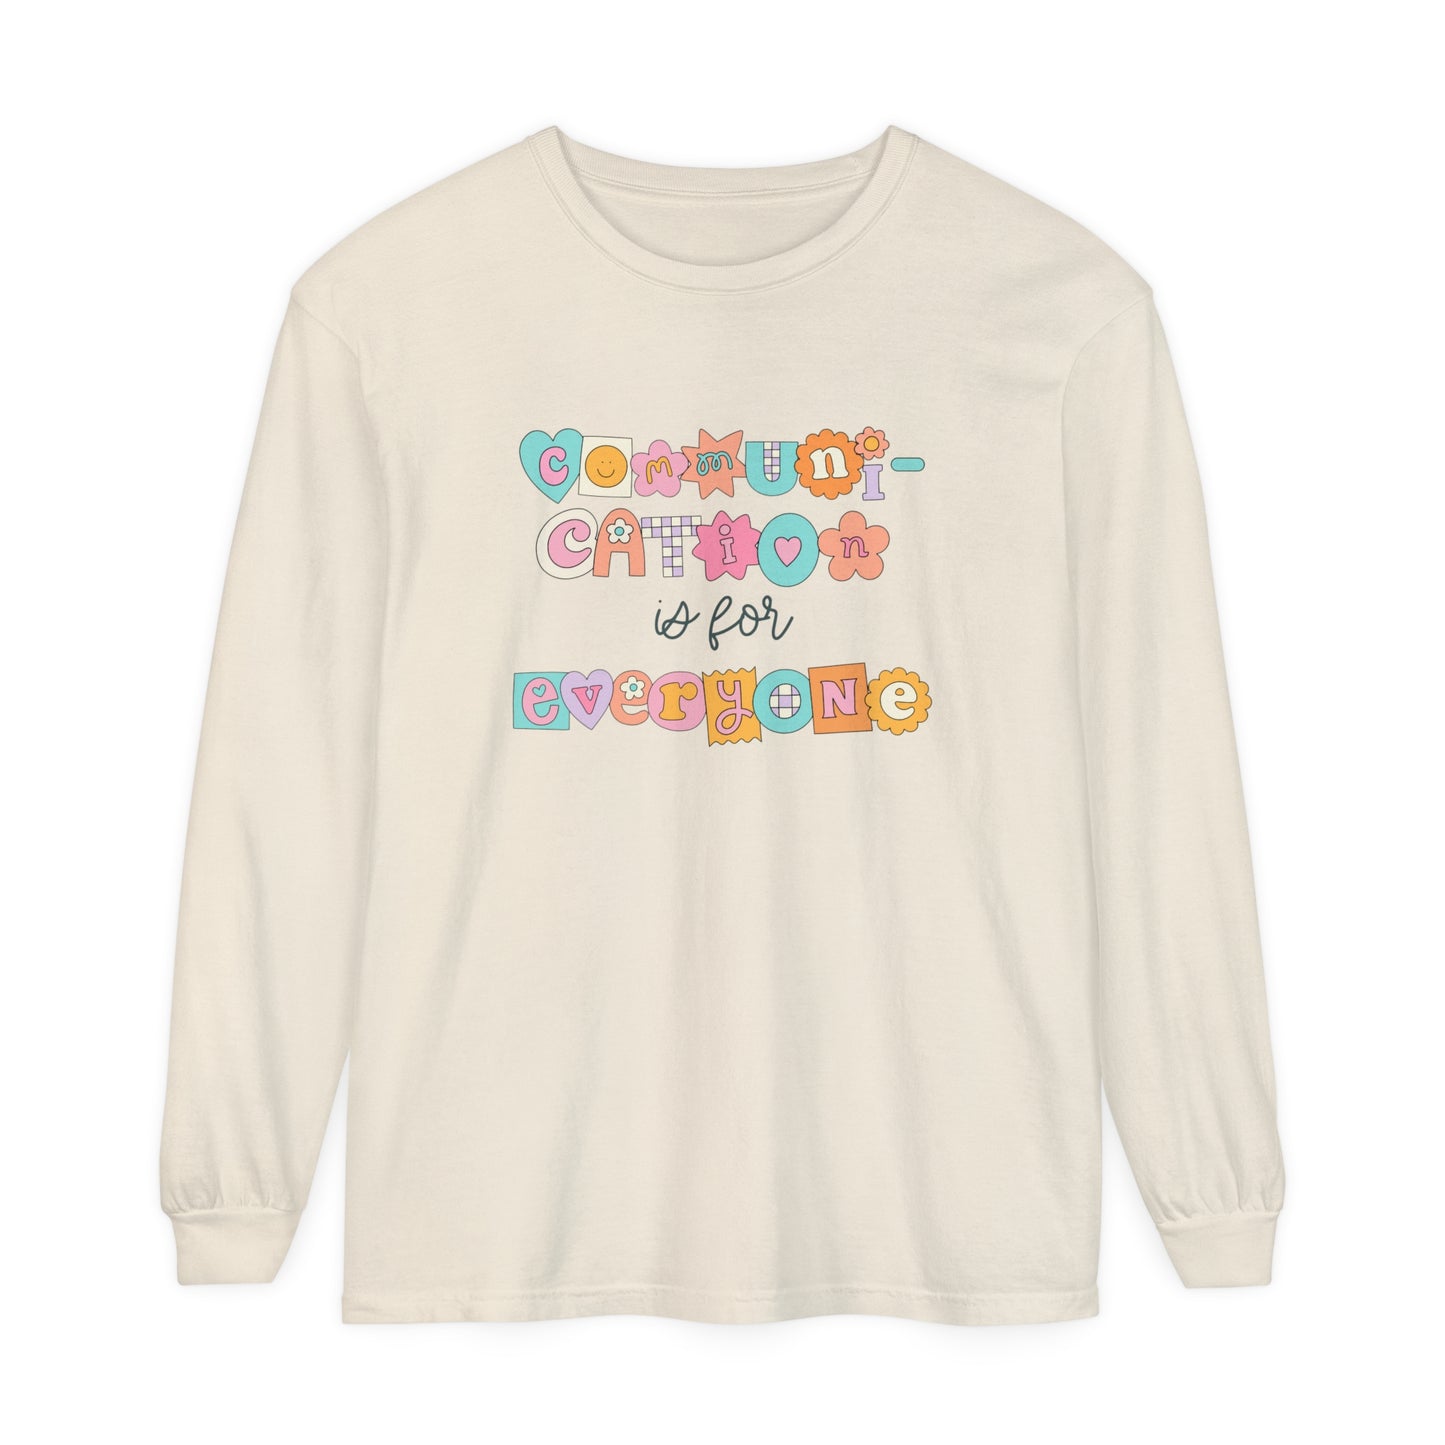 Communication Is for Everyone Long Sleeve Comfort Colors T-Shirt